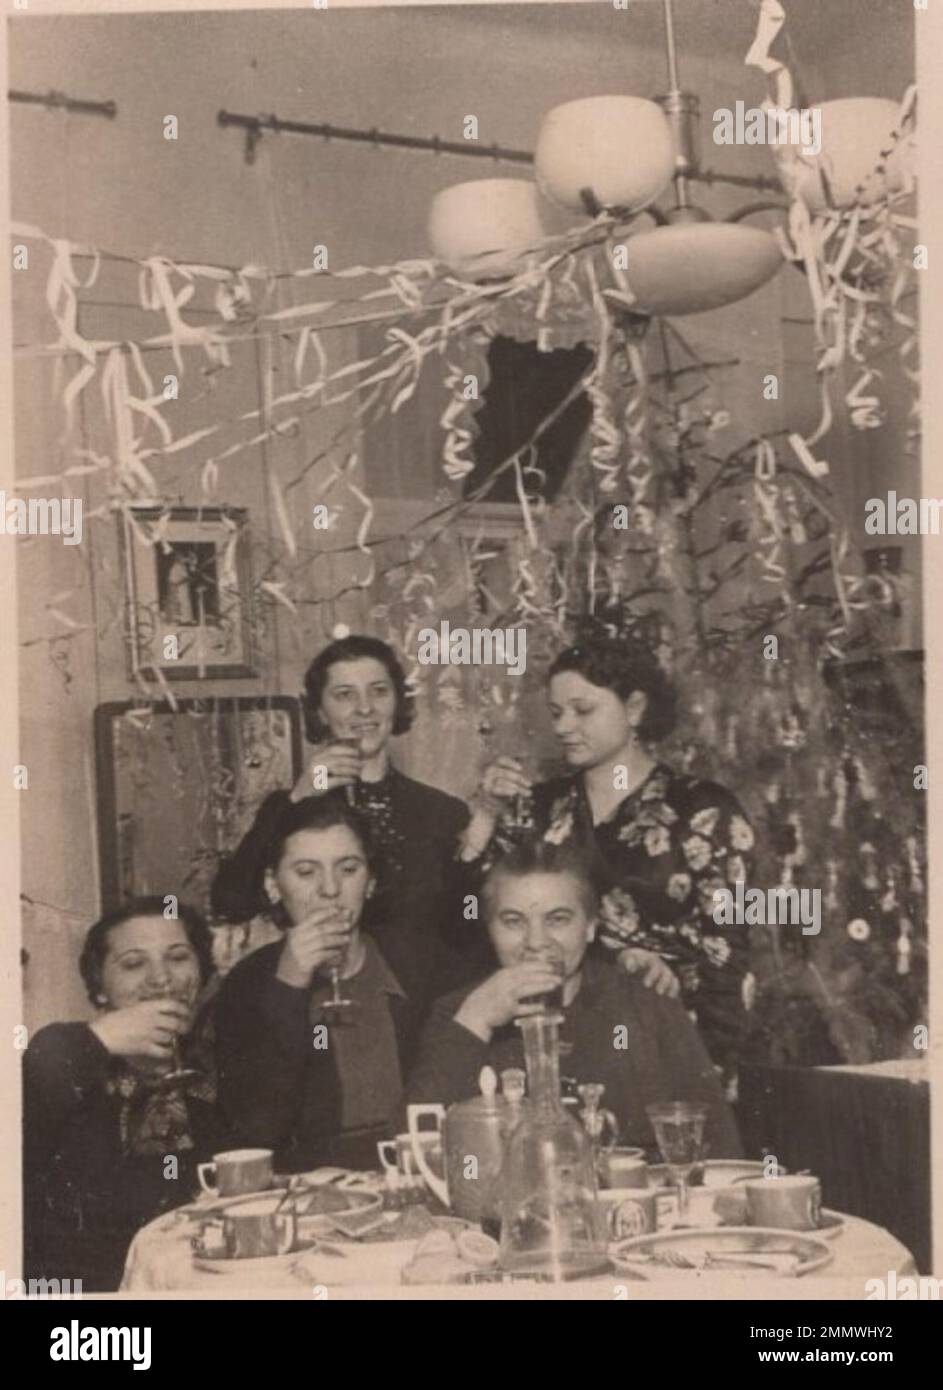 Vintage drinking / life event / celebrations / family photo / friends photo / vintage trip / vintage celebration / group photo / vintage family / vintage friends / Additional-Rights-Clearences-Not Available Stock Photo